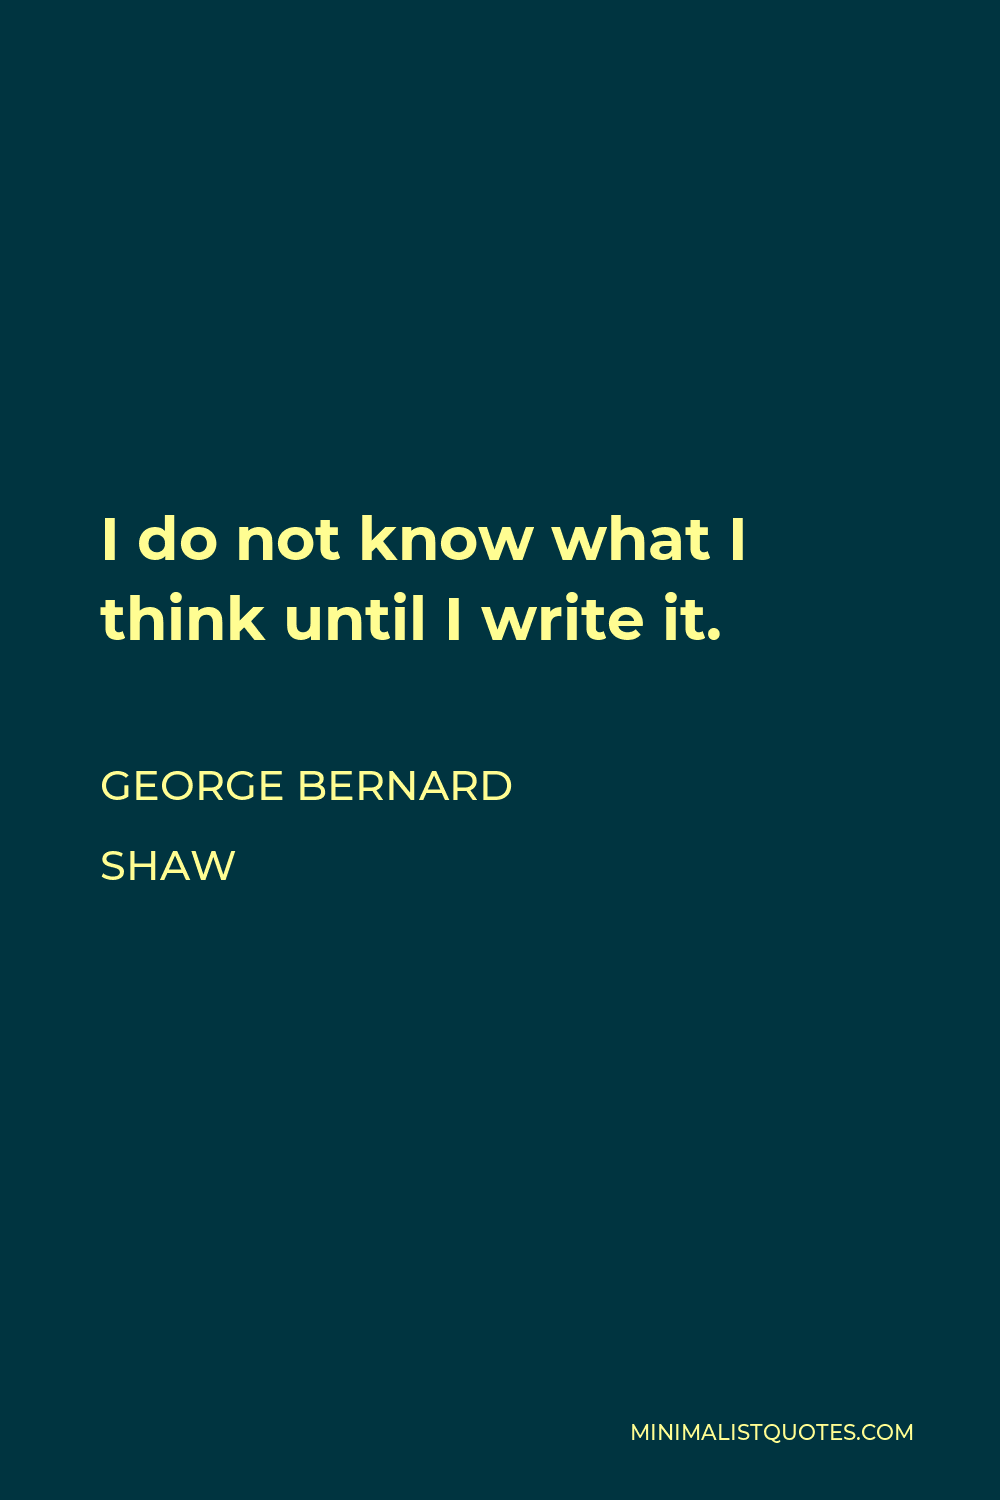 George Bernard Shaw Quote - I do not know what I think until I write it.